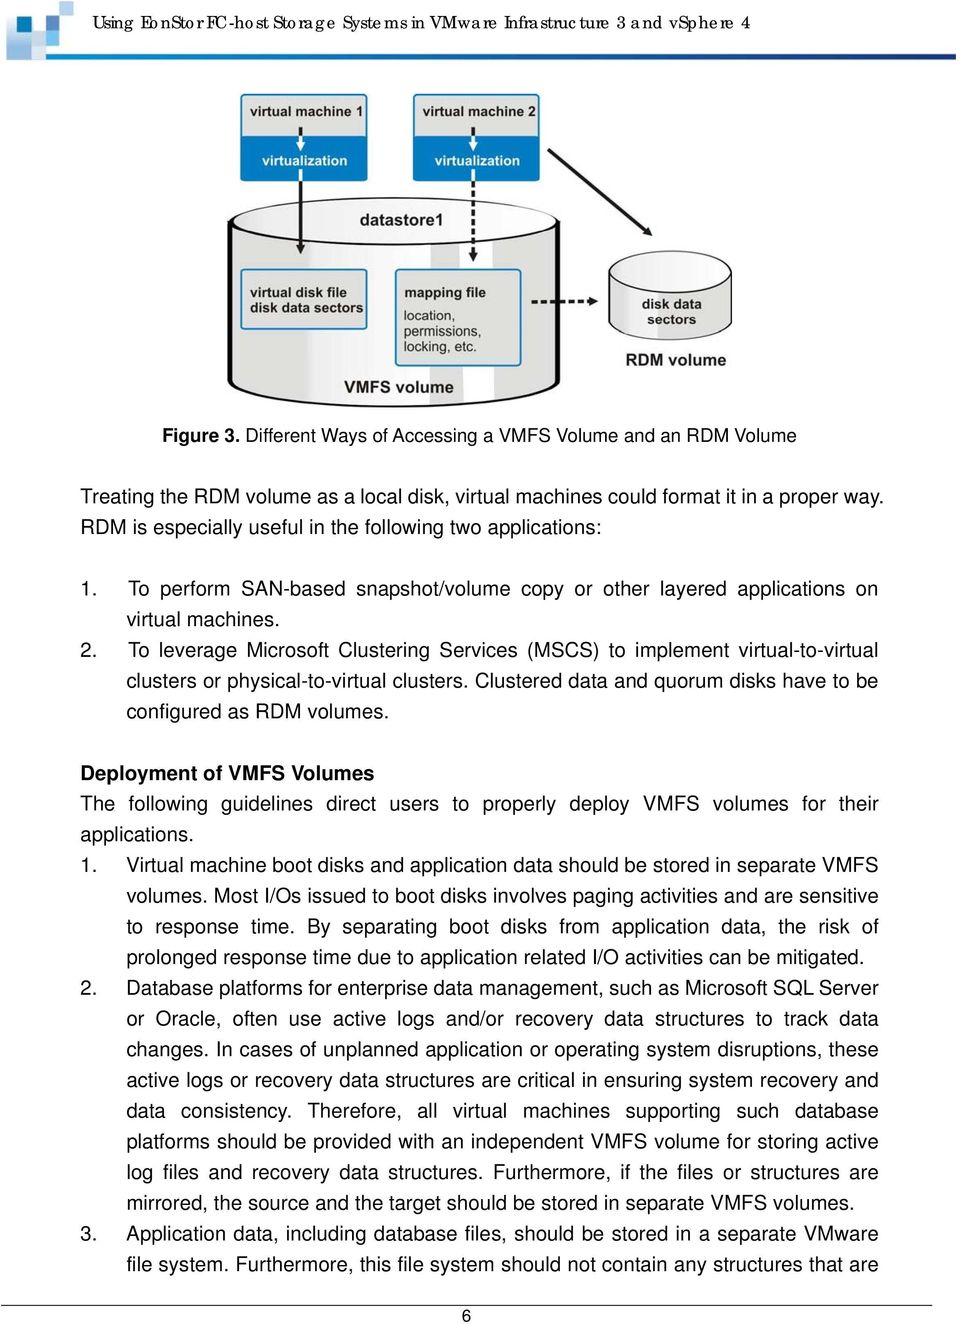 To leverage Microsoft Clustering Services (MSCS) to implement virtual-to-virtual clusters or physical-to-virtual clusters. Clustered data and quorum disks have to be configured as RDM volumes.